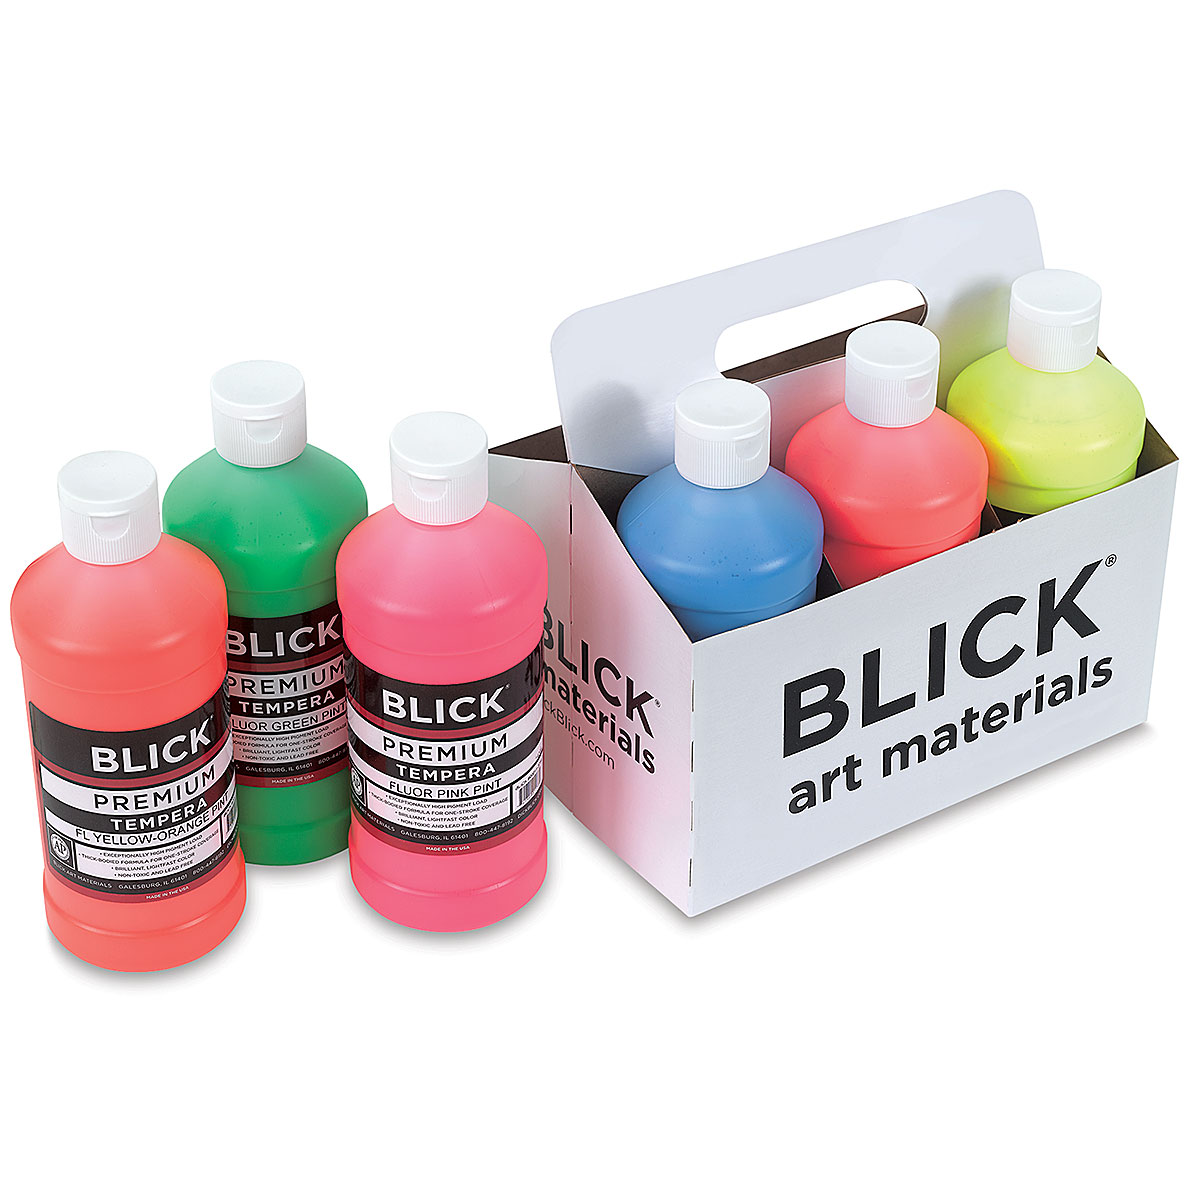 Blickrylic Student Acrylics - Basic Color Set, Pack of 6, Pints